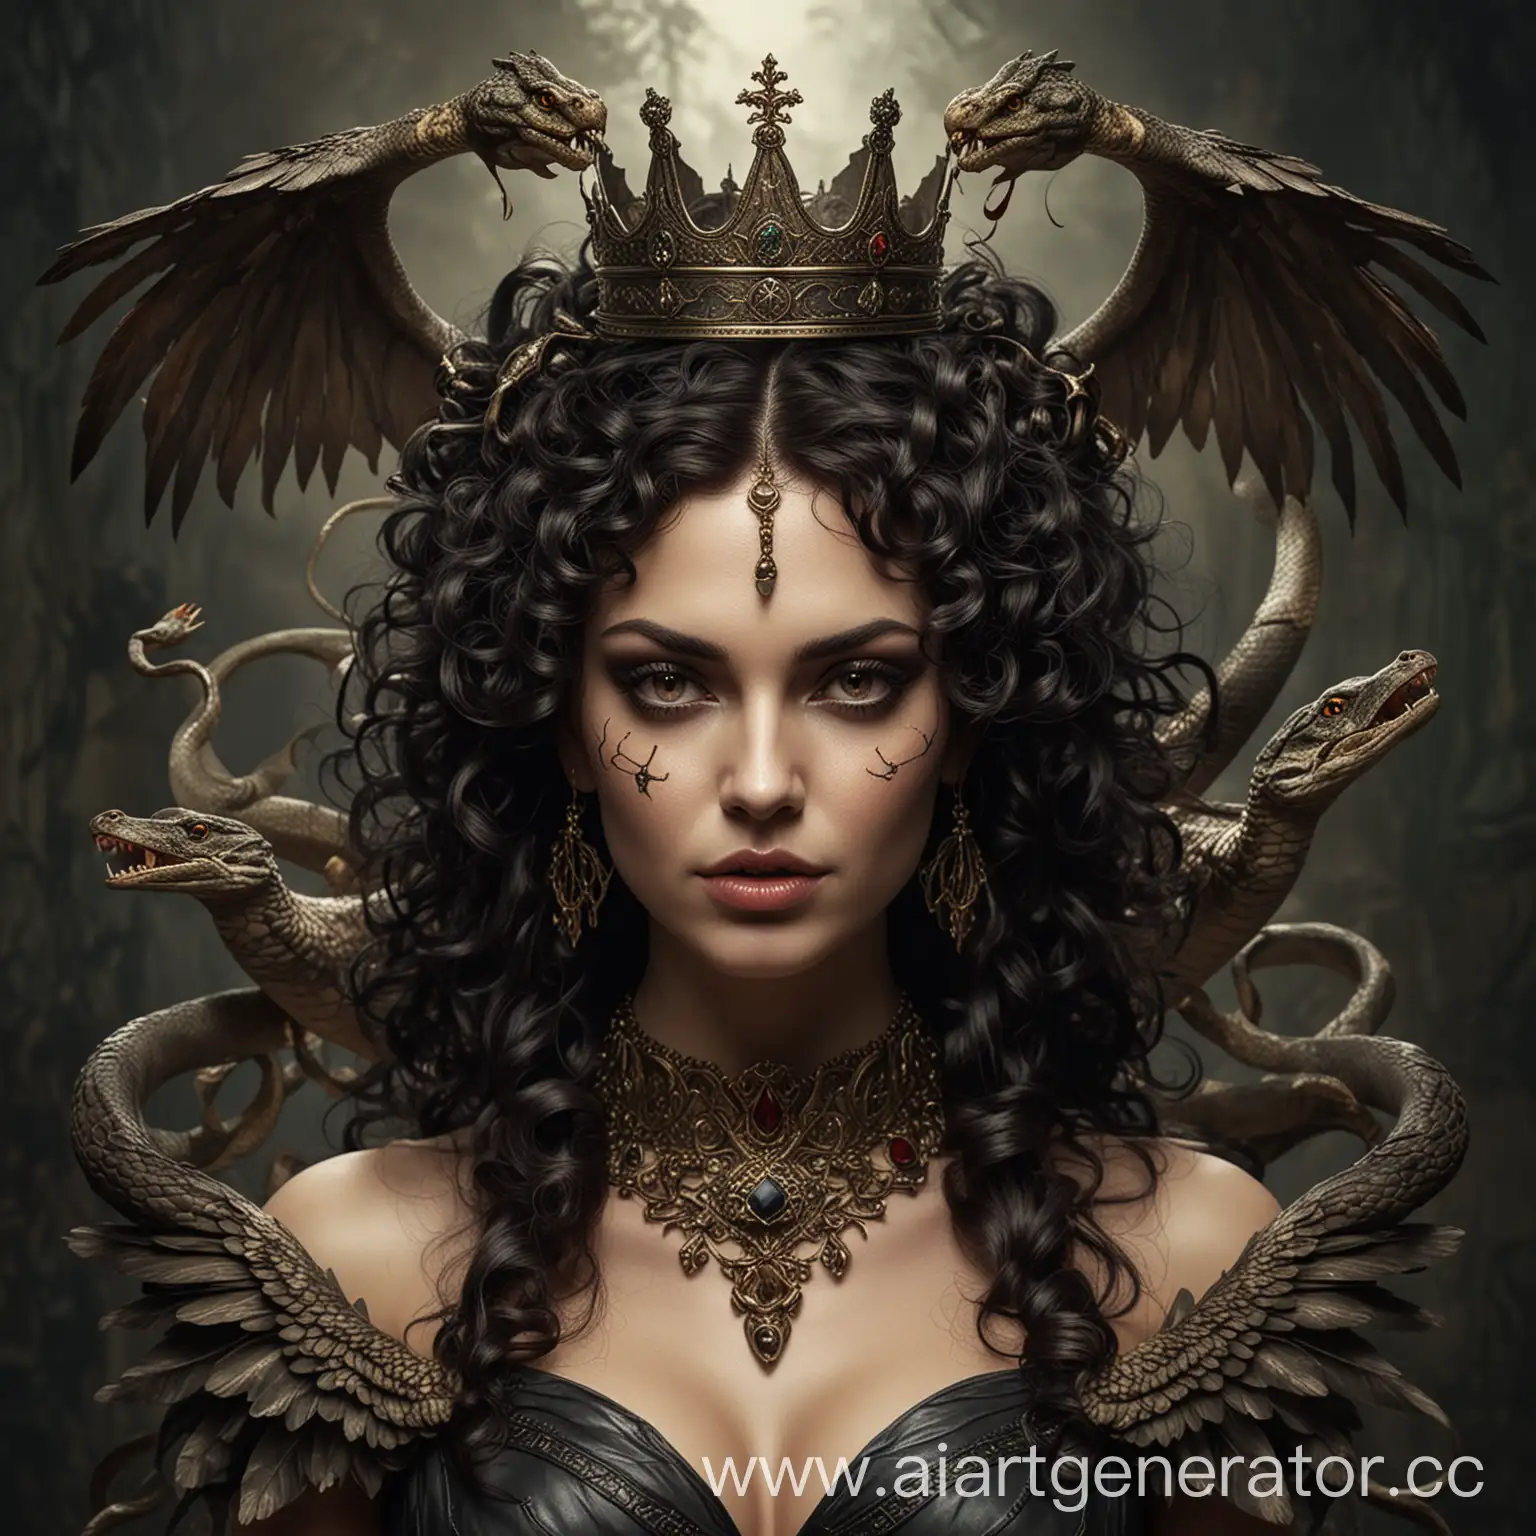 Mysterious-Queen-with-Dark-Curls-Crown-and-Serpentine-Companions